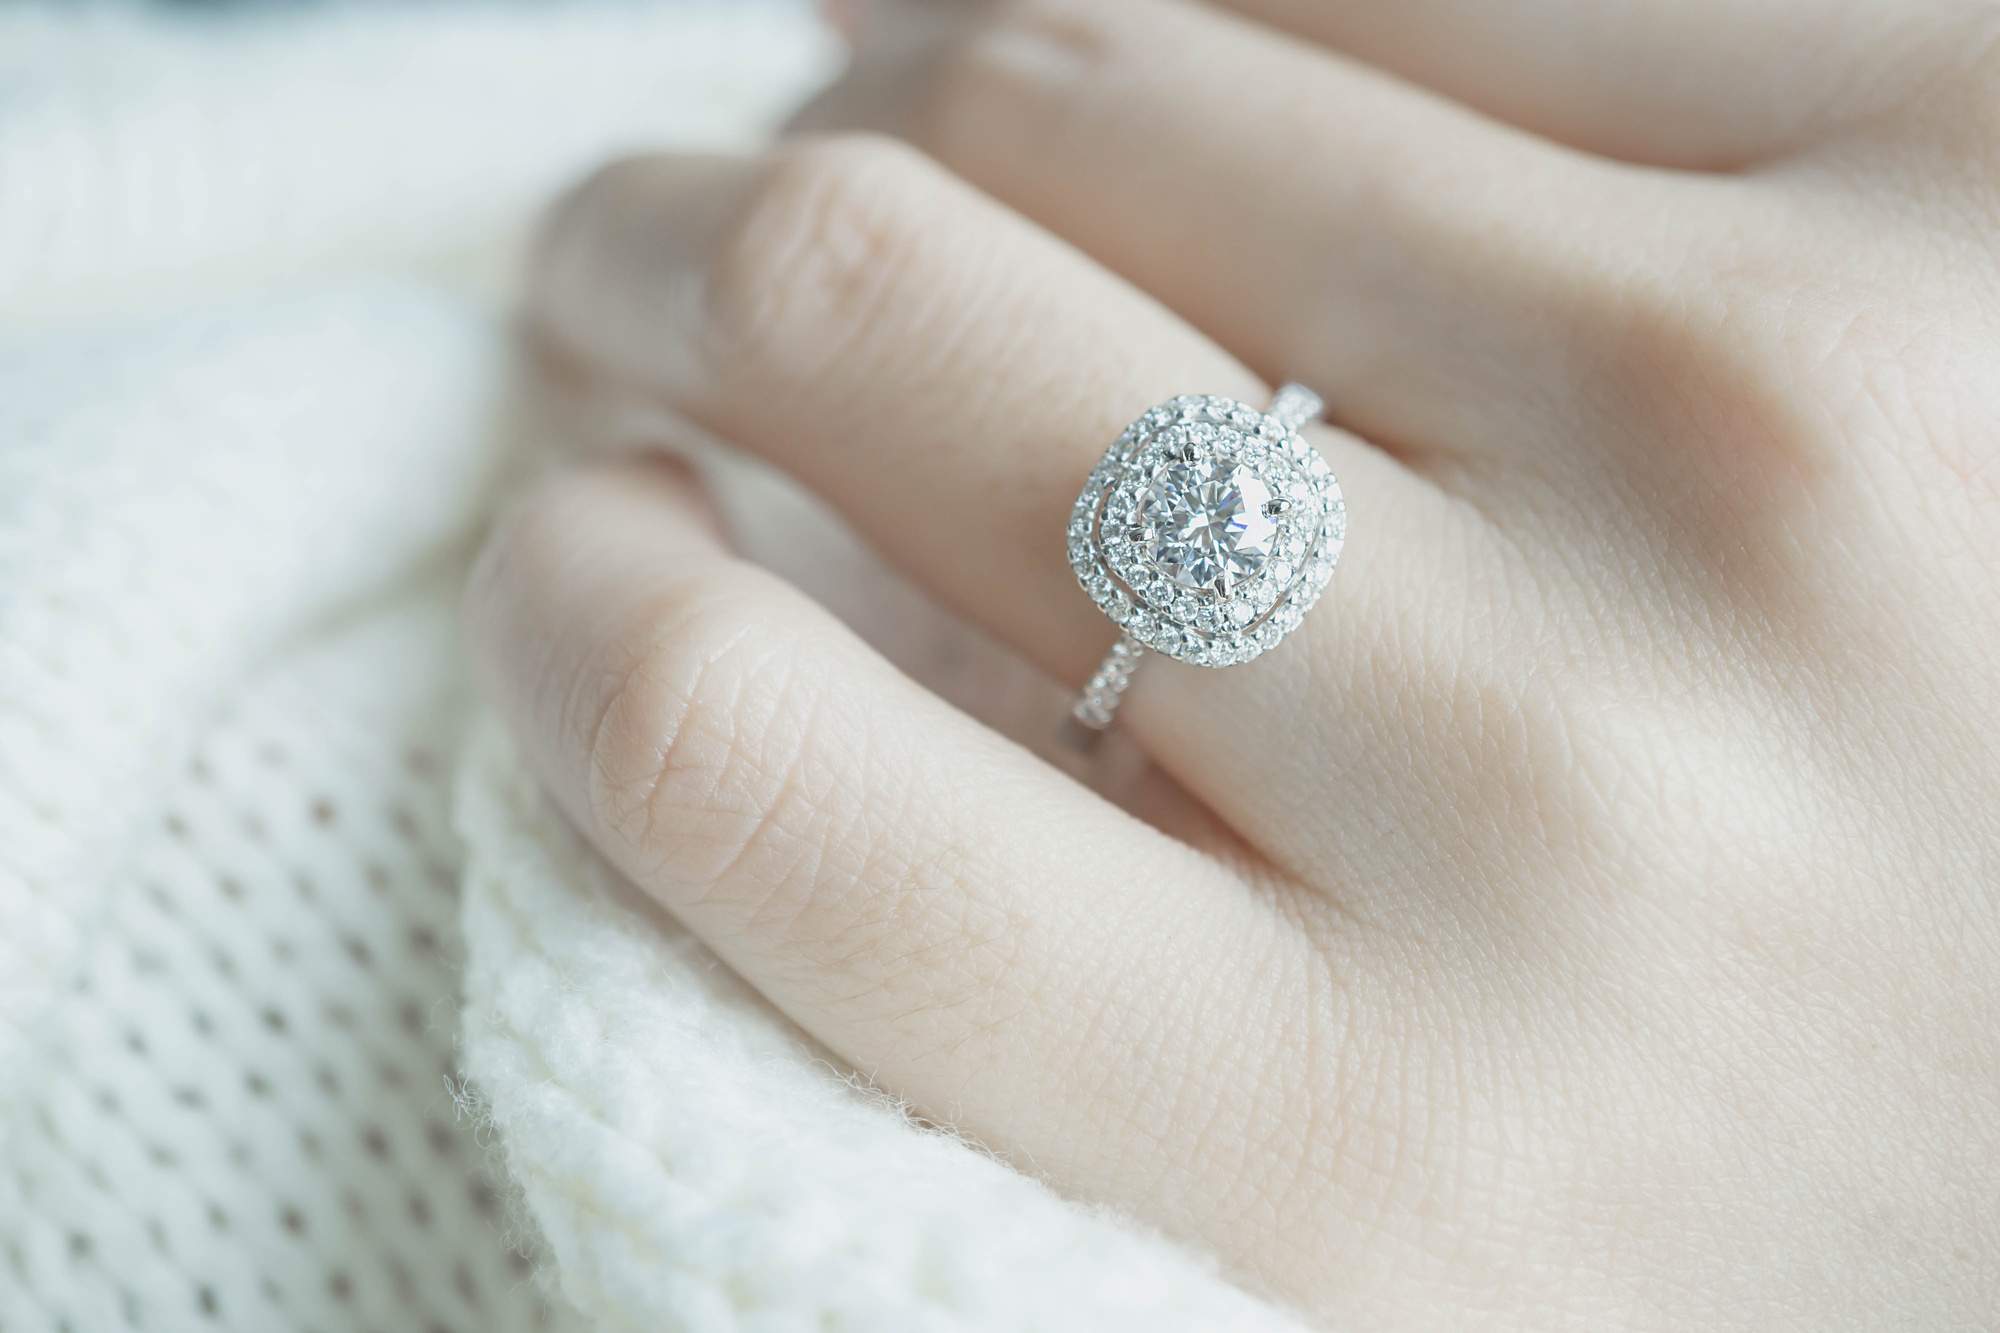 How Do I Choose the Best Engagement Rings for My Upcoming Proposal?